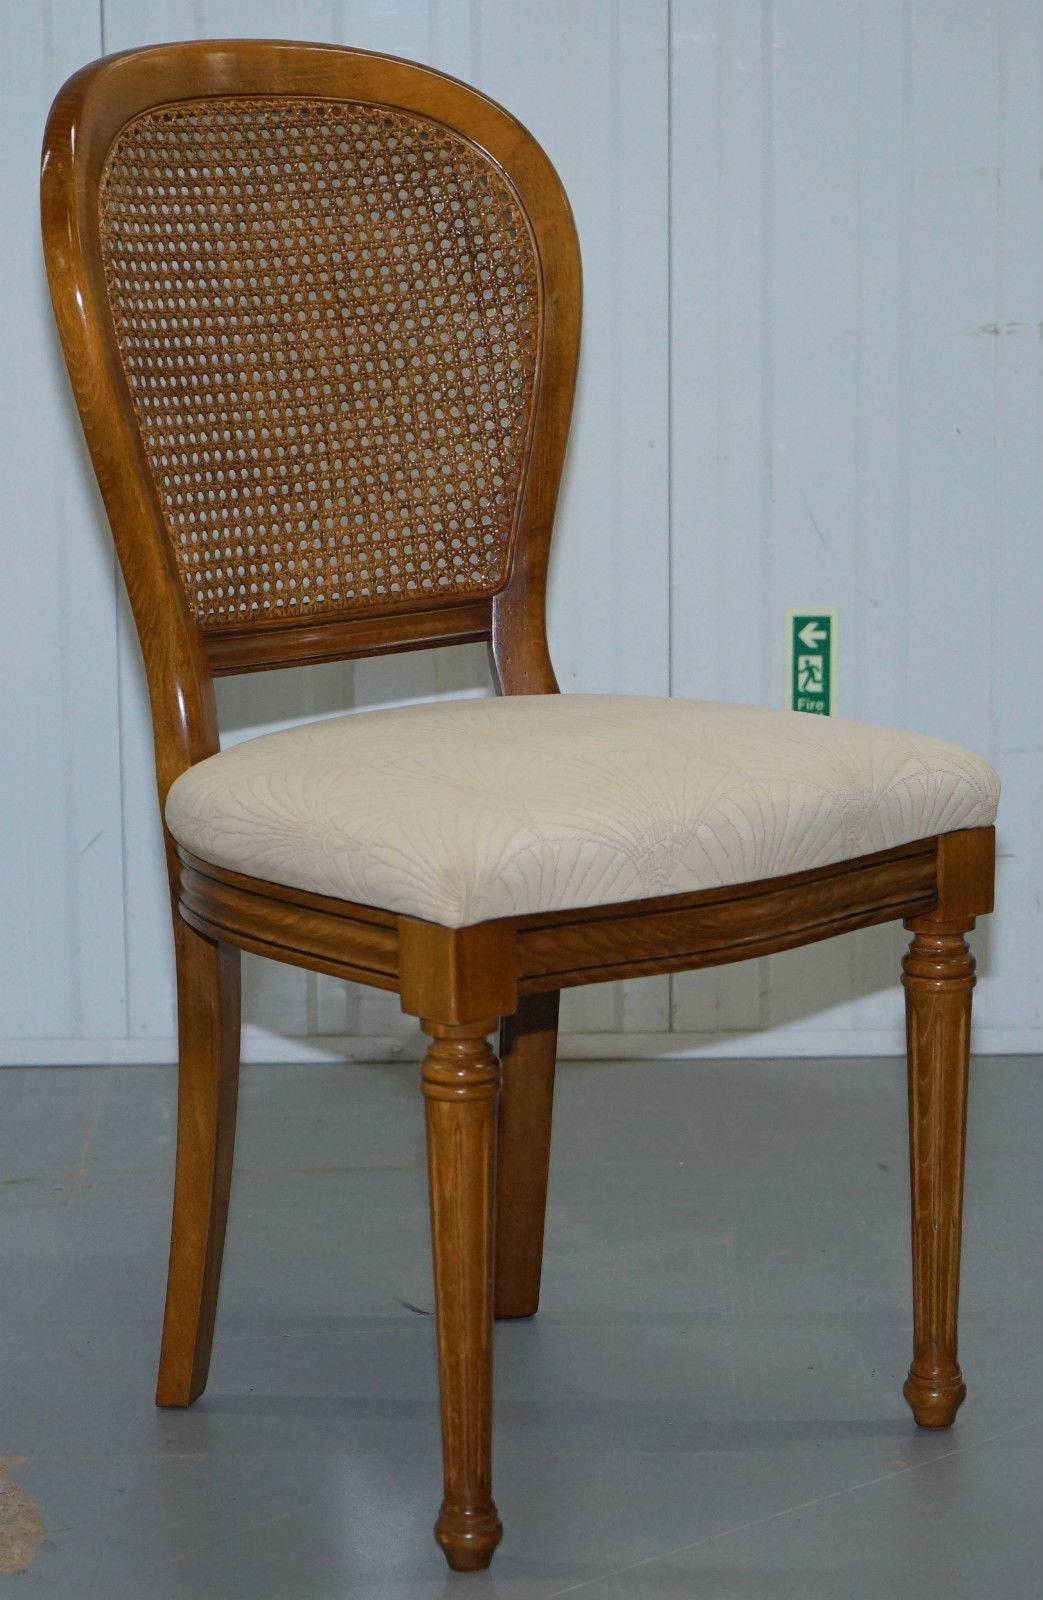 We are delighted to offer for auction this set of four very rare hand made in France Grange solid Cherry wood dining chairs

Please note the delivery fee listed is just a guide, for an accurate quote please send me your postcode and I'll price it up